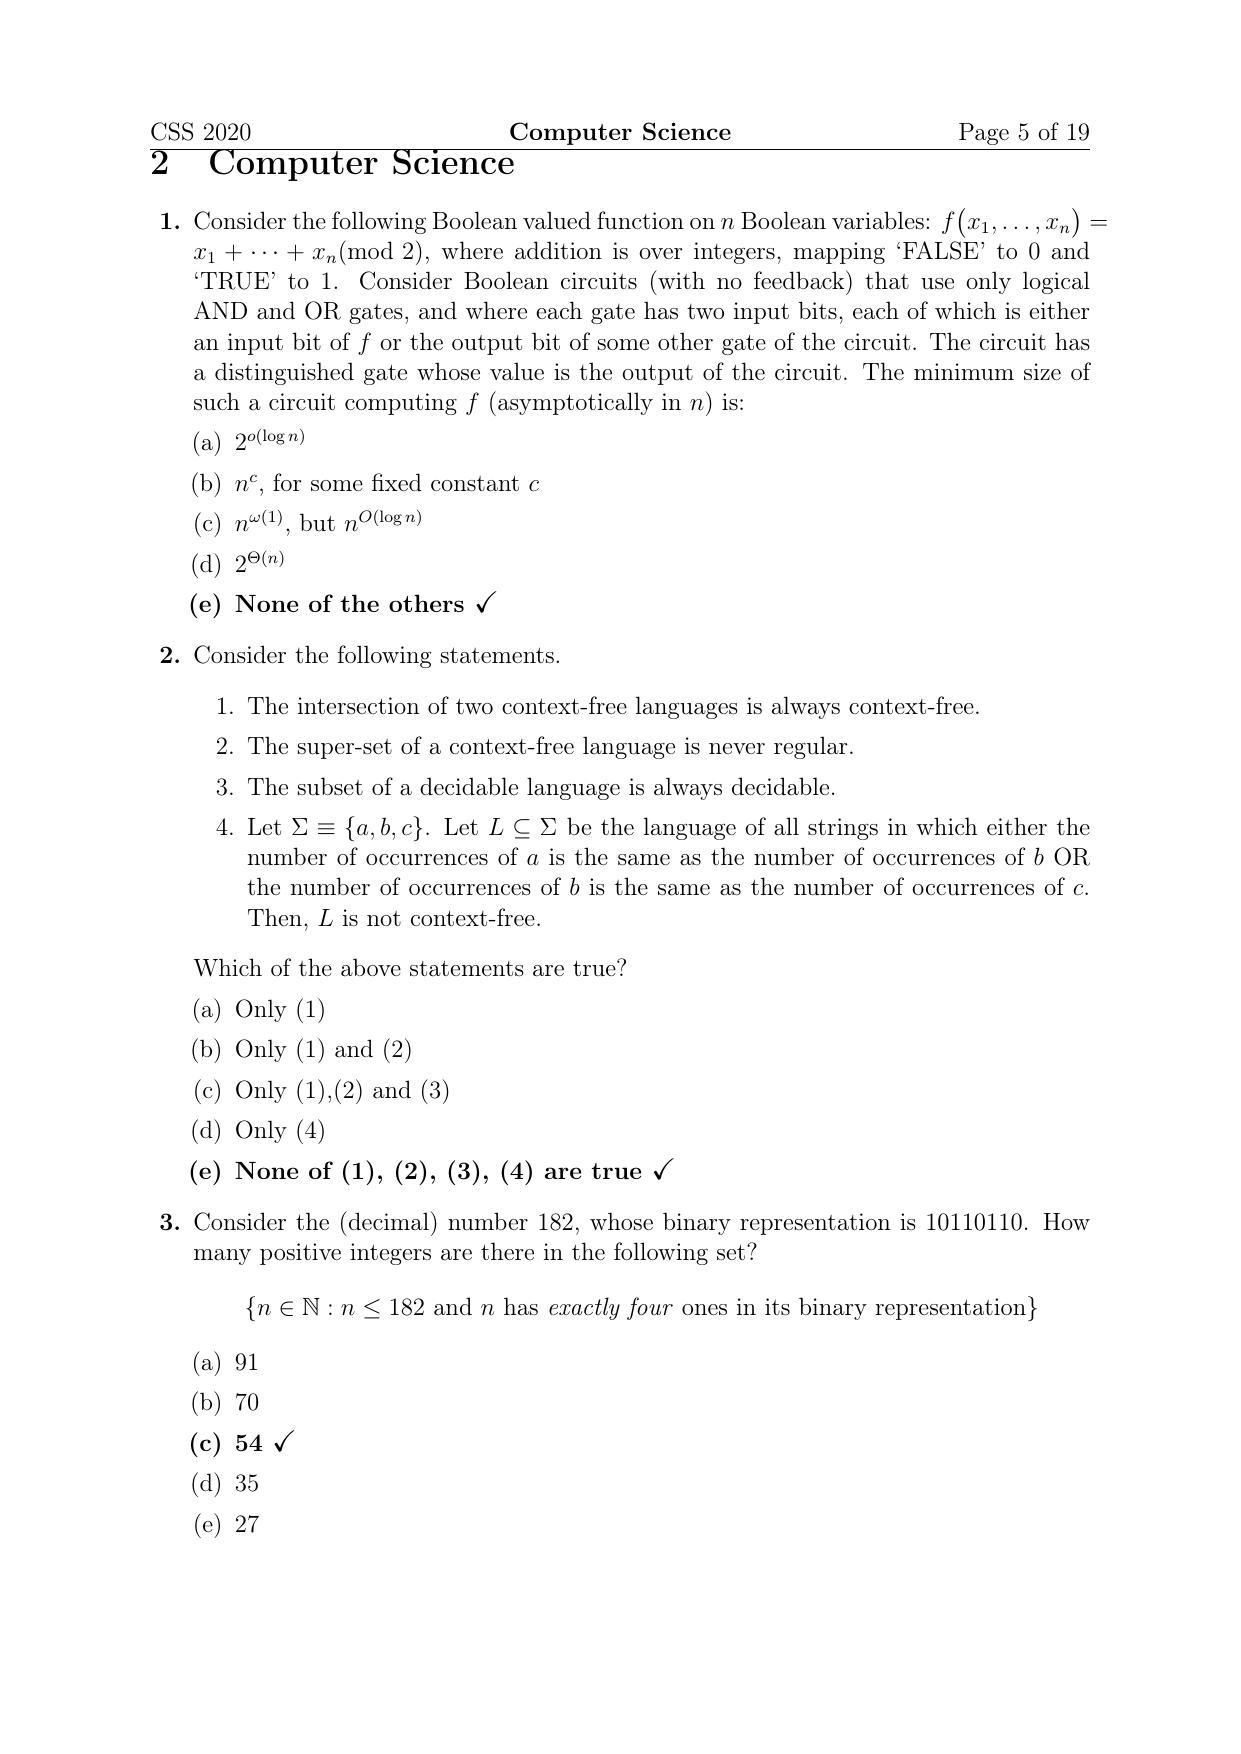 TIFR GS 2020 Computer & Systems Sciences Question Paper - Page 5